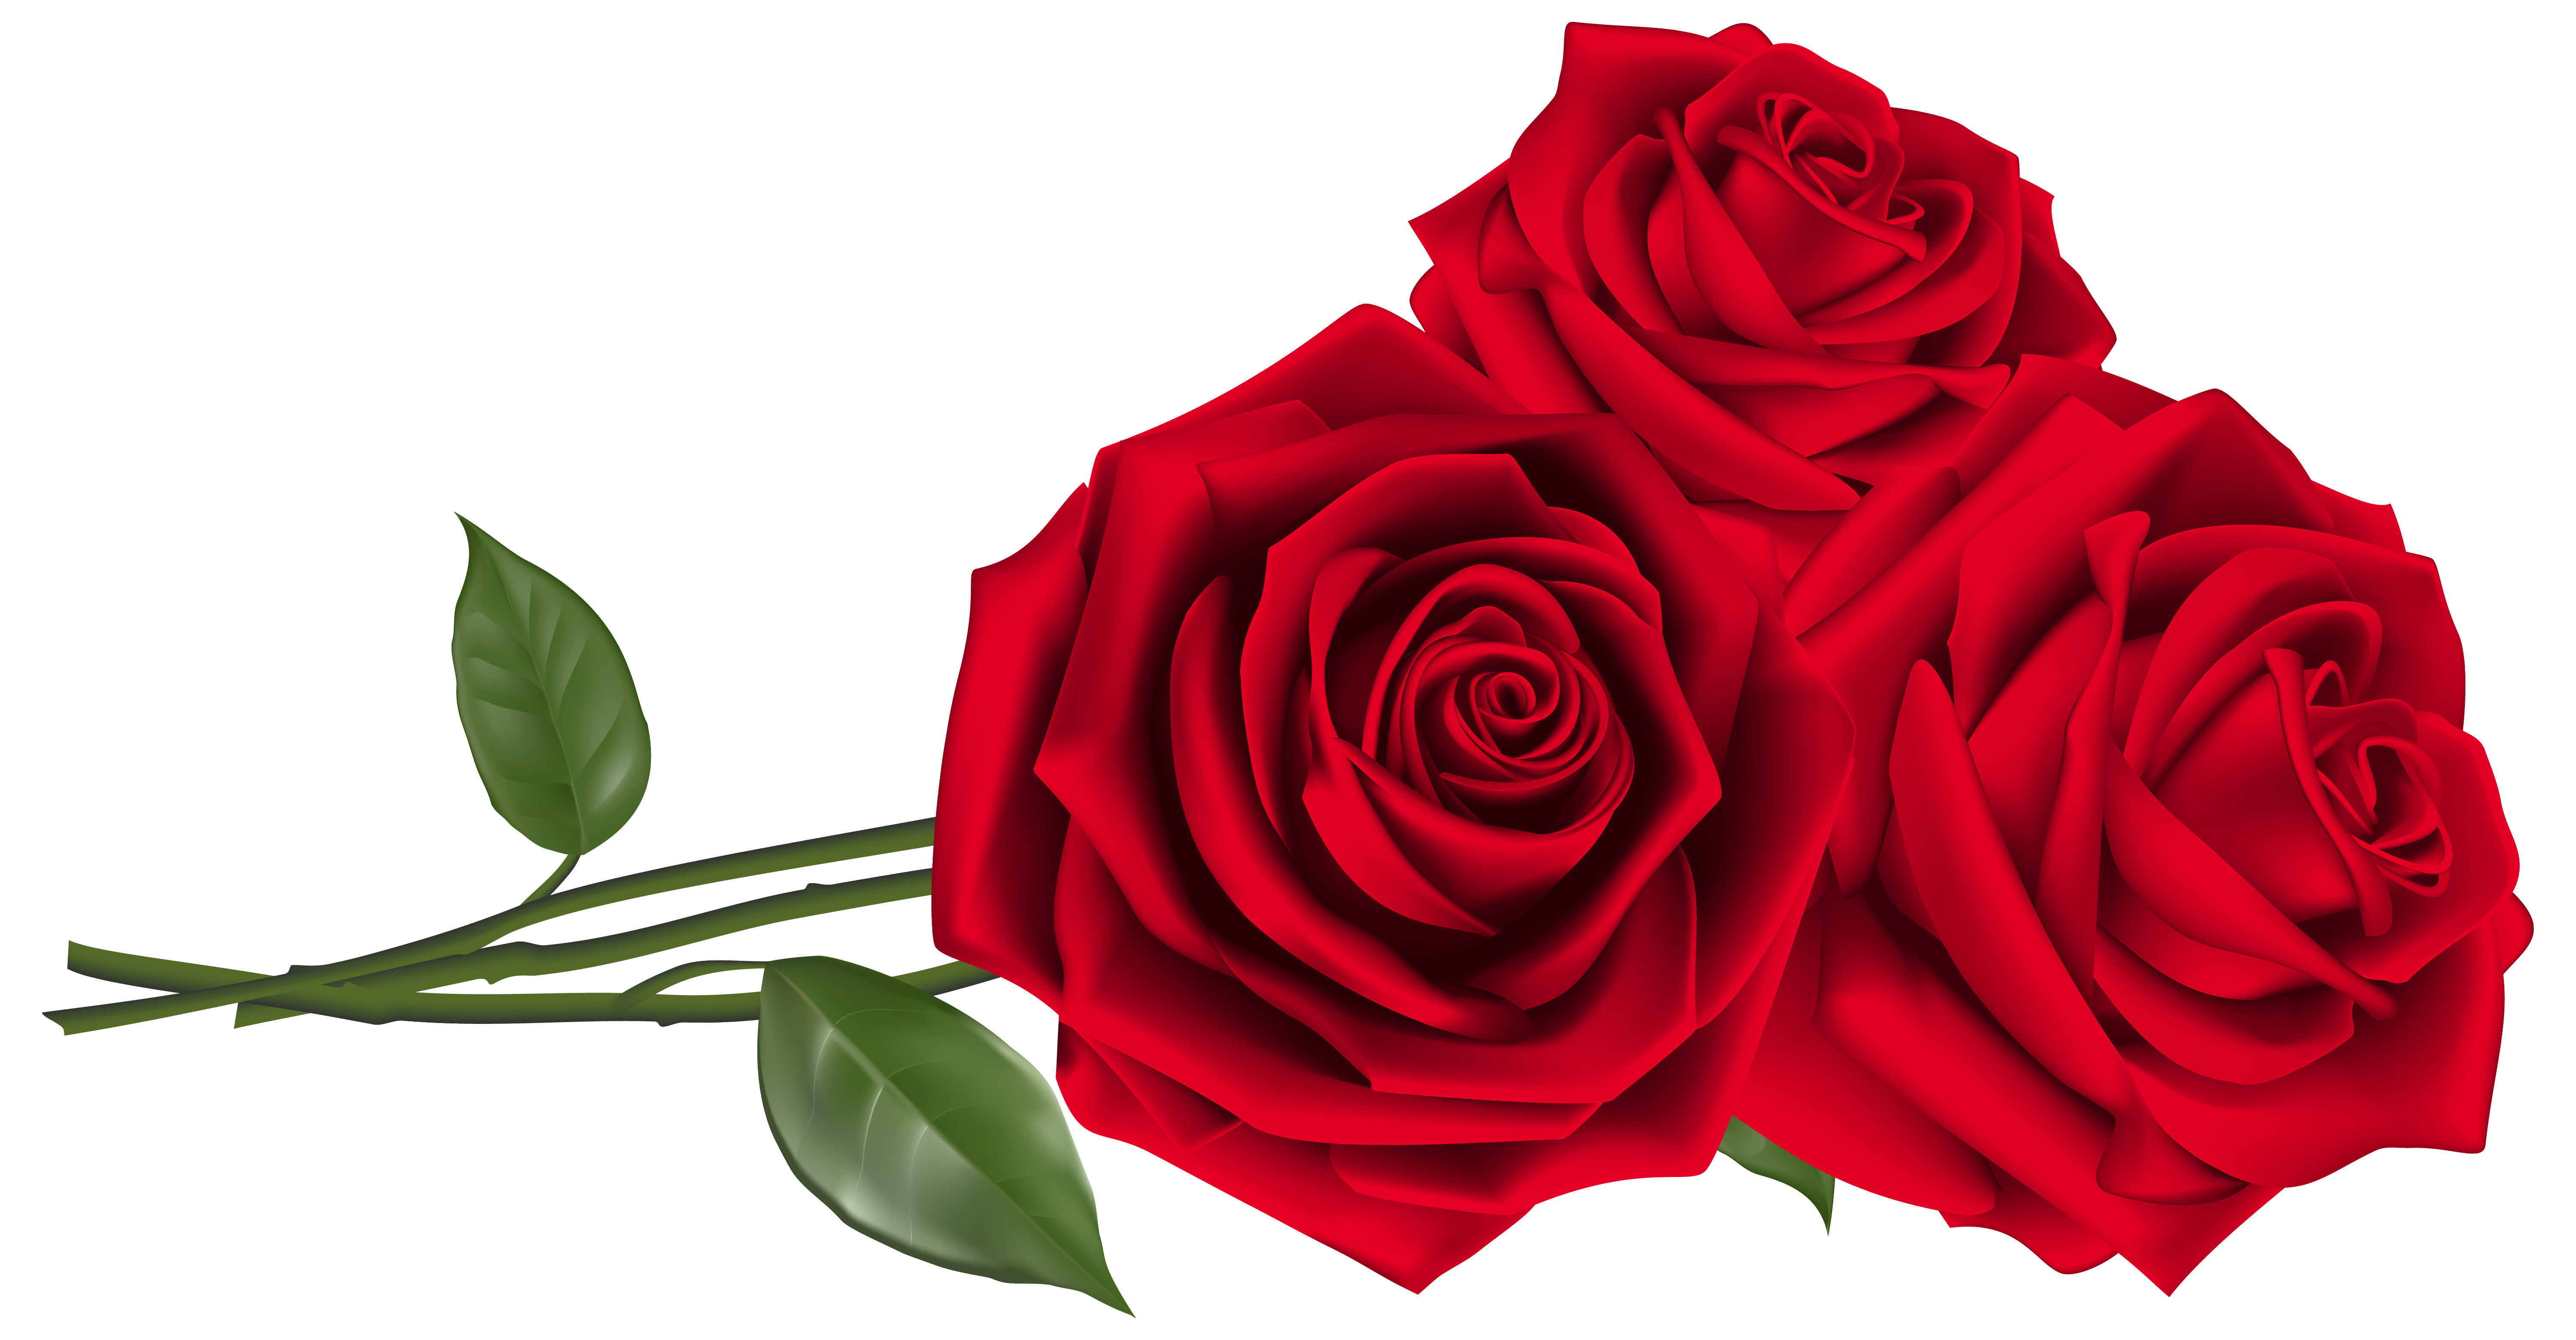 clipart images of red roses - photo #35